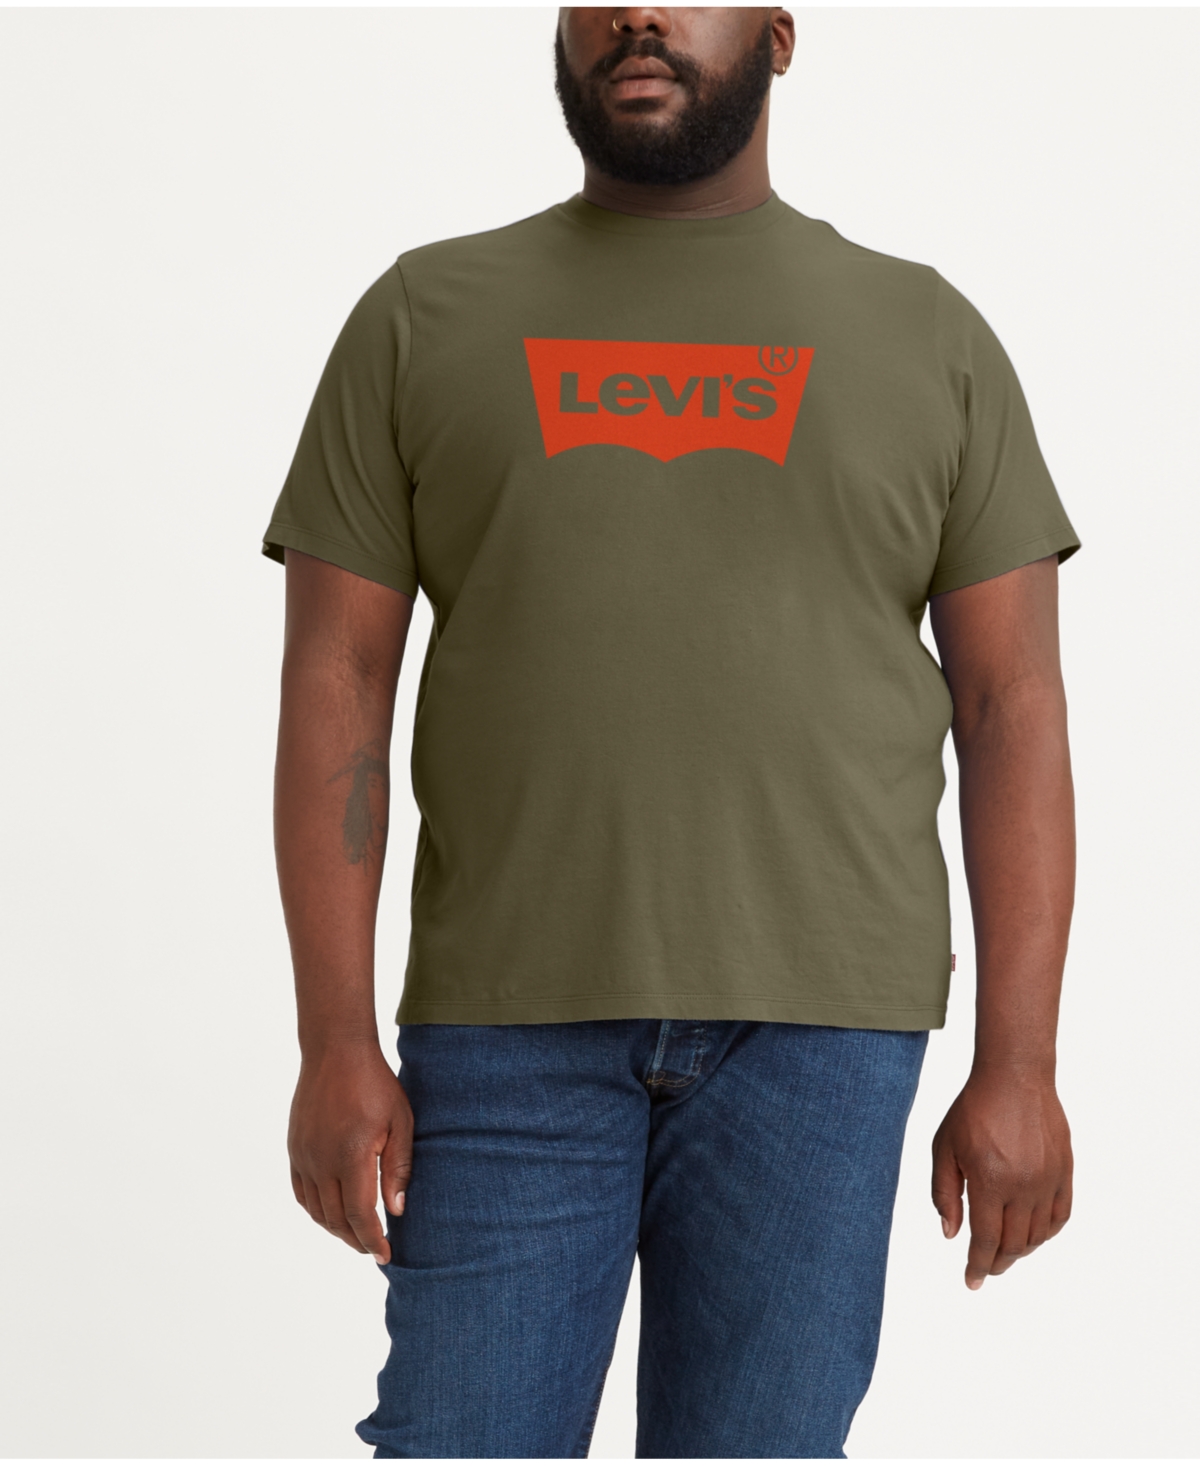 Levi's Men's Big and Tall Graphic T-shirt